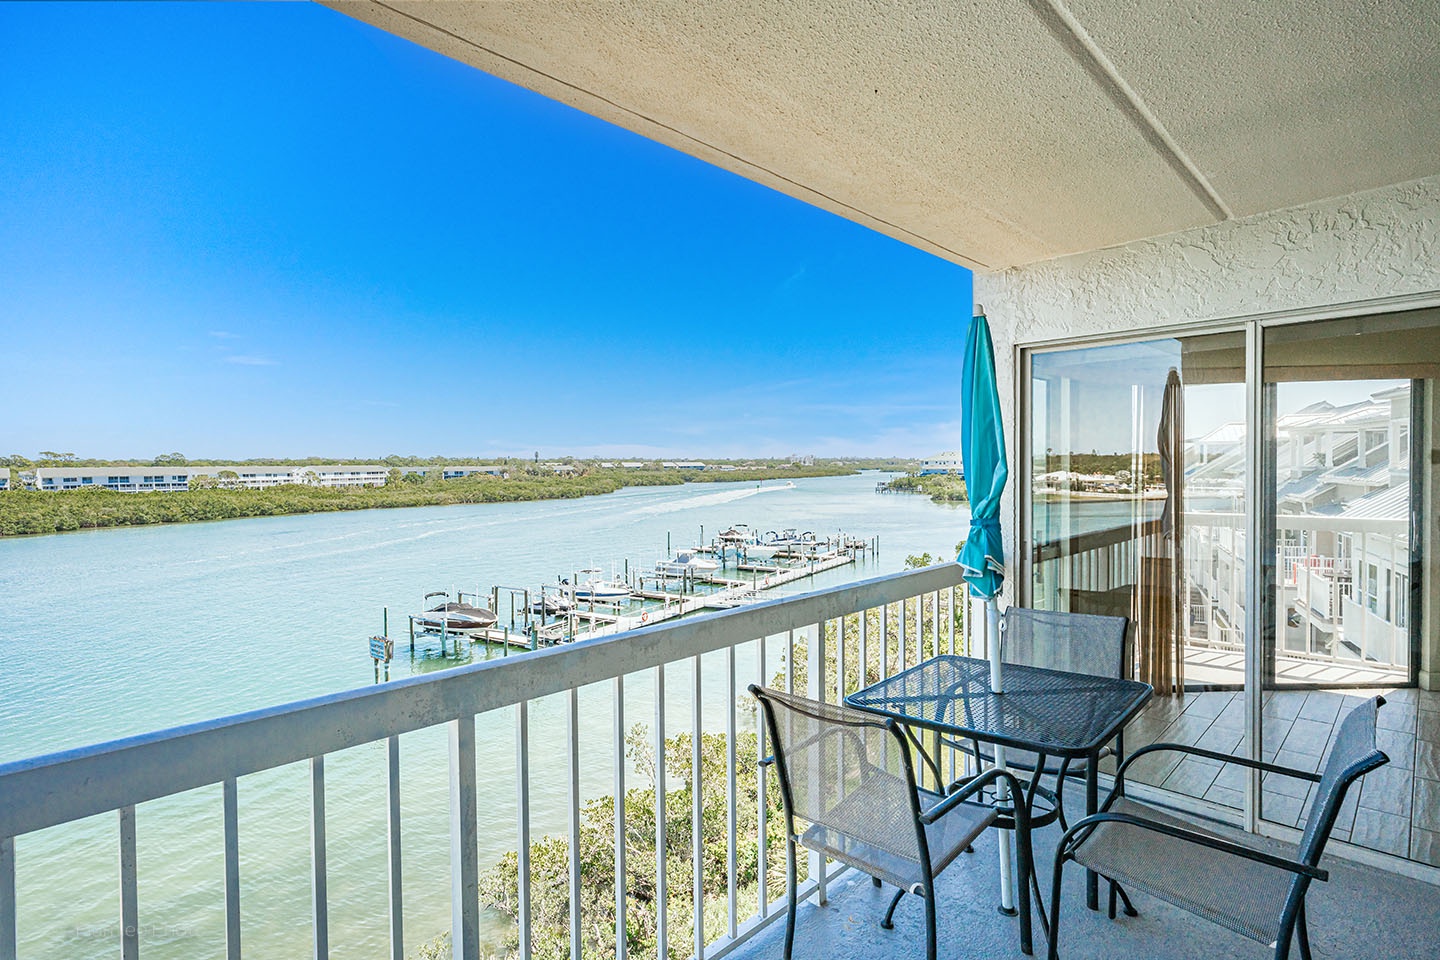 Private balcony overlooks the Intracoastal Waterway